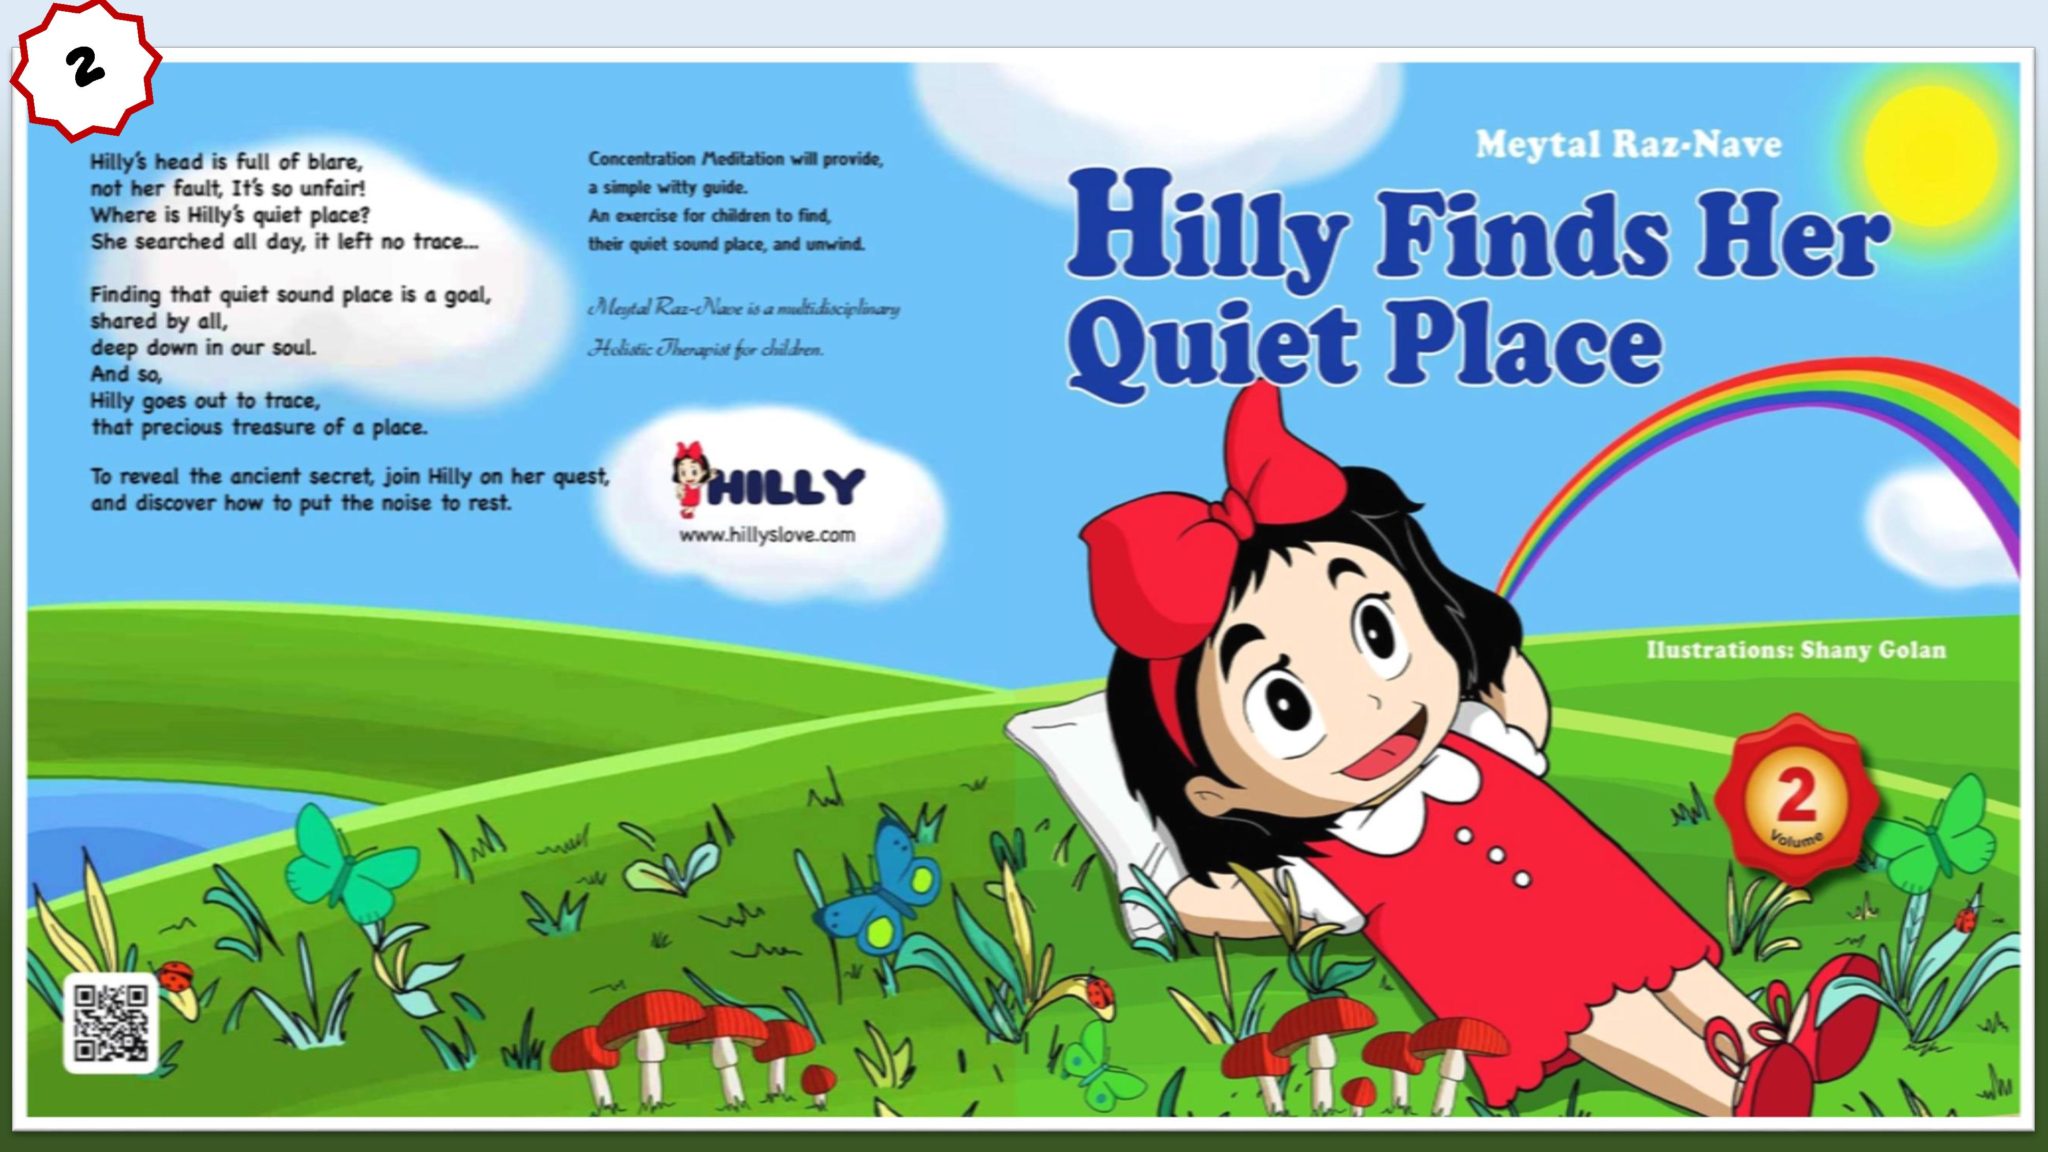 FREE: Hilly Finds Her Quiet Place by Meytal Raz-Nave